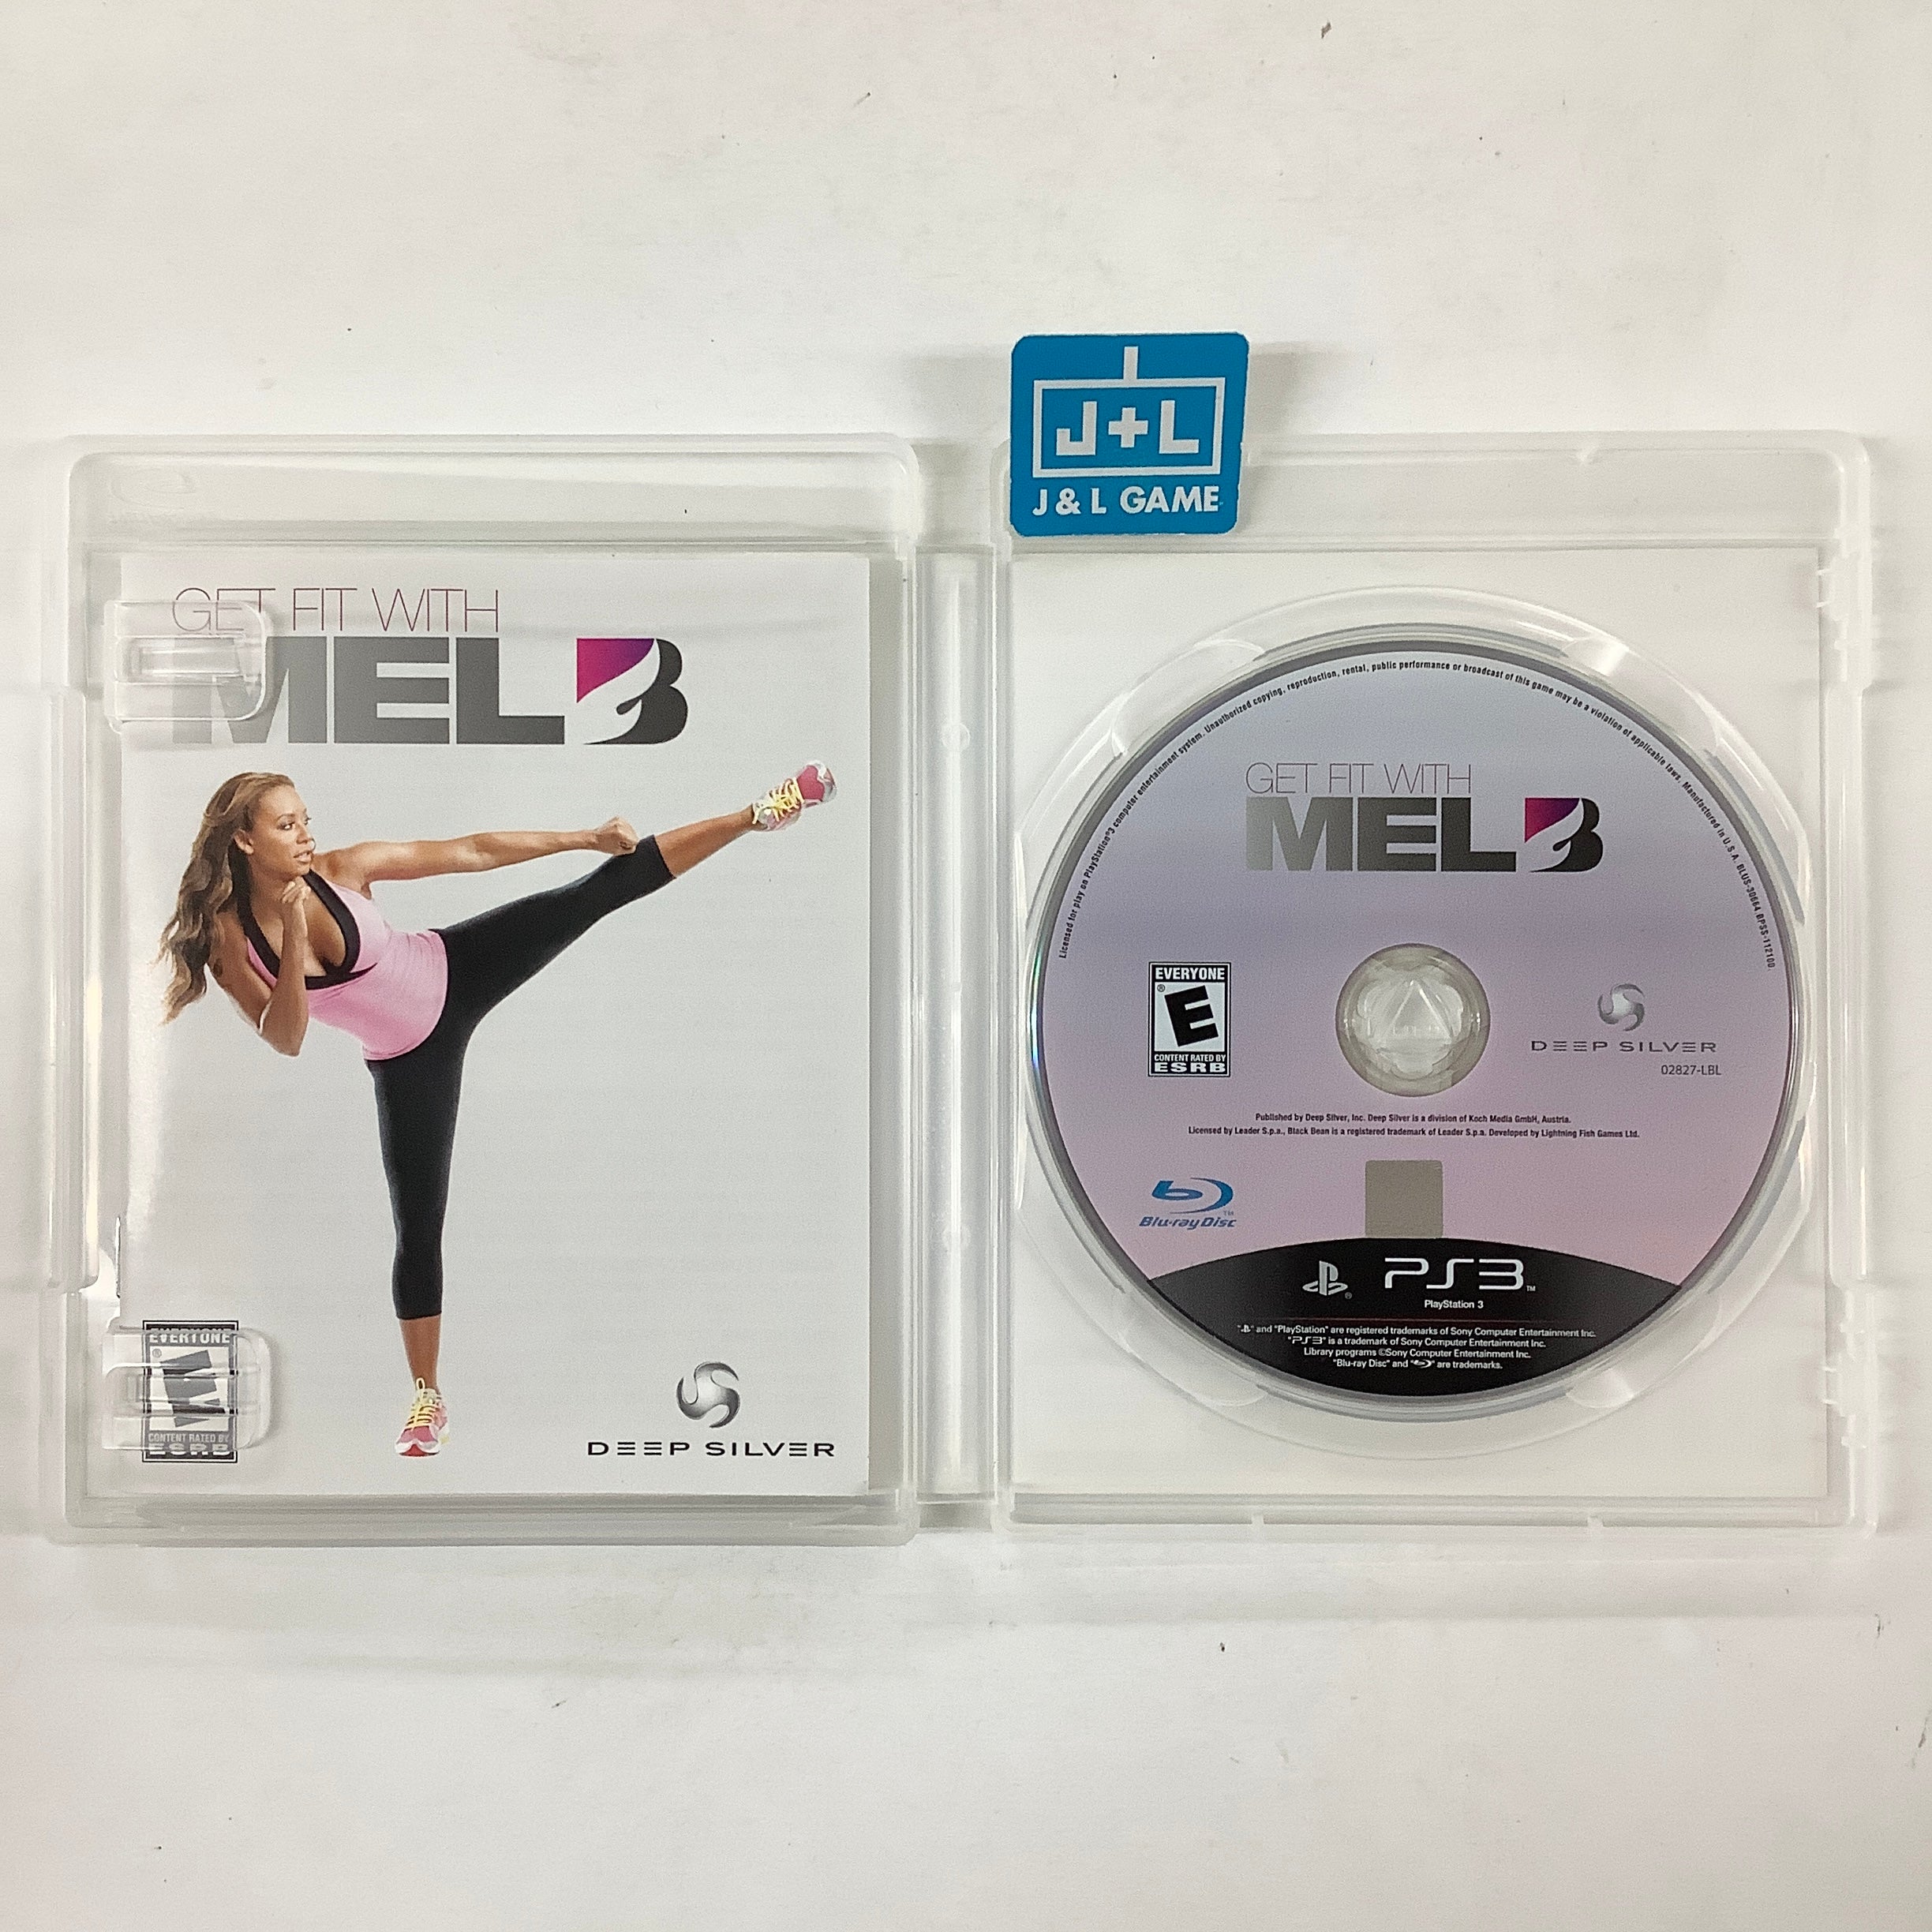 Get Fit With Mel B (PlayStation Move Required) - (PS3) PlayStation 3 [Pre-Owned] Video Games Deep Silver   